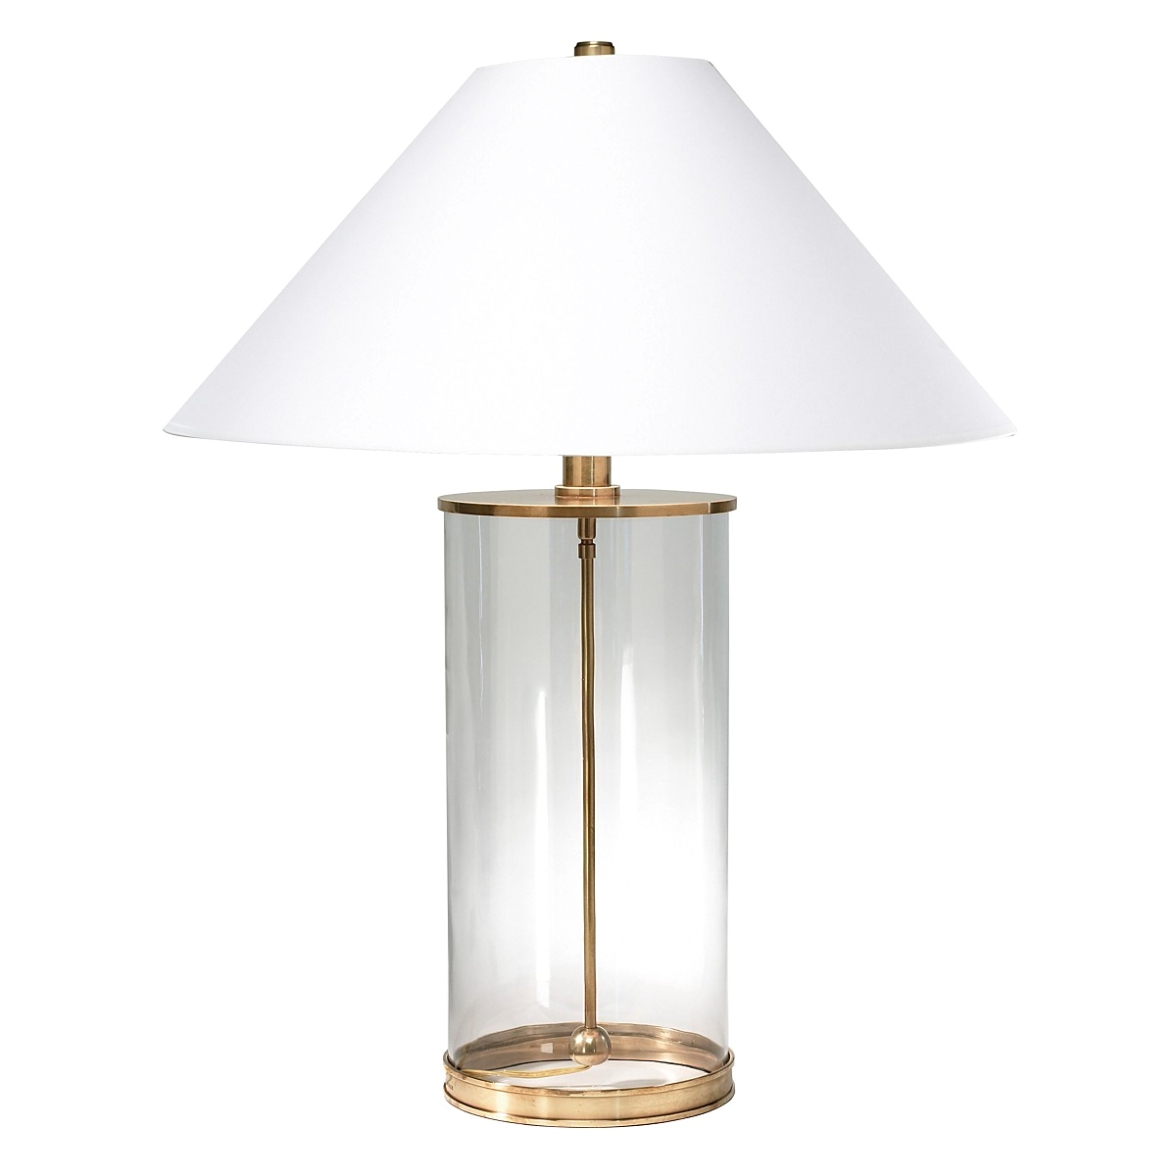 appealing ralph lauren lamps for your residence concept ralph lauren table lamps lighting and